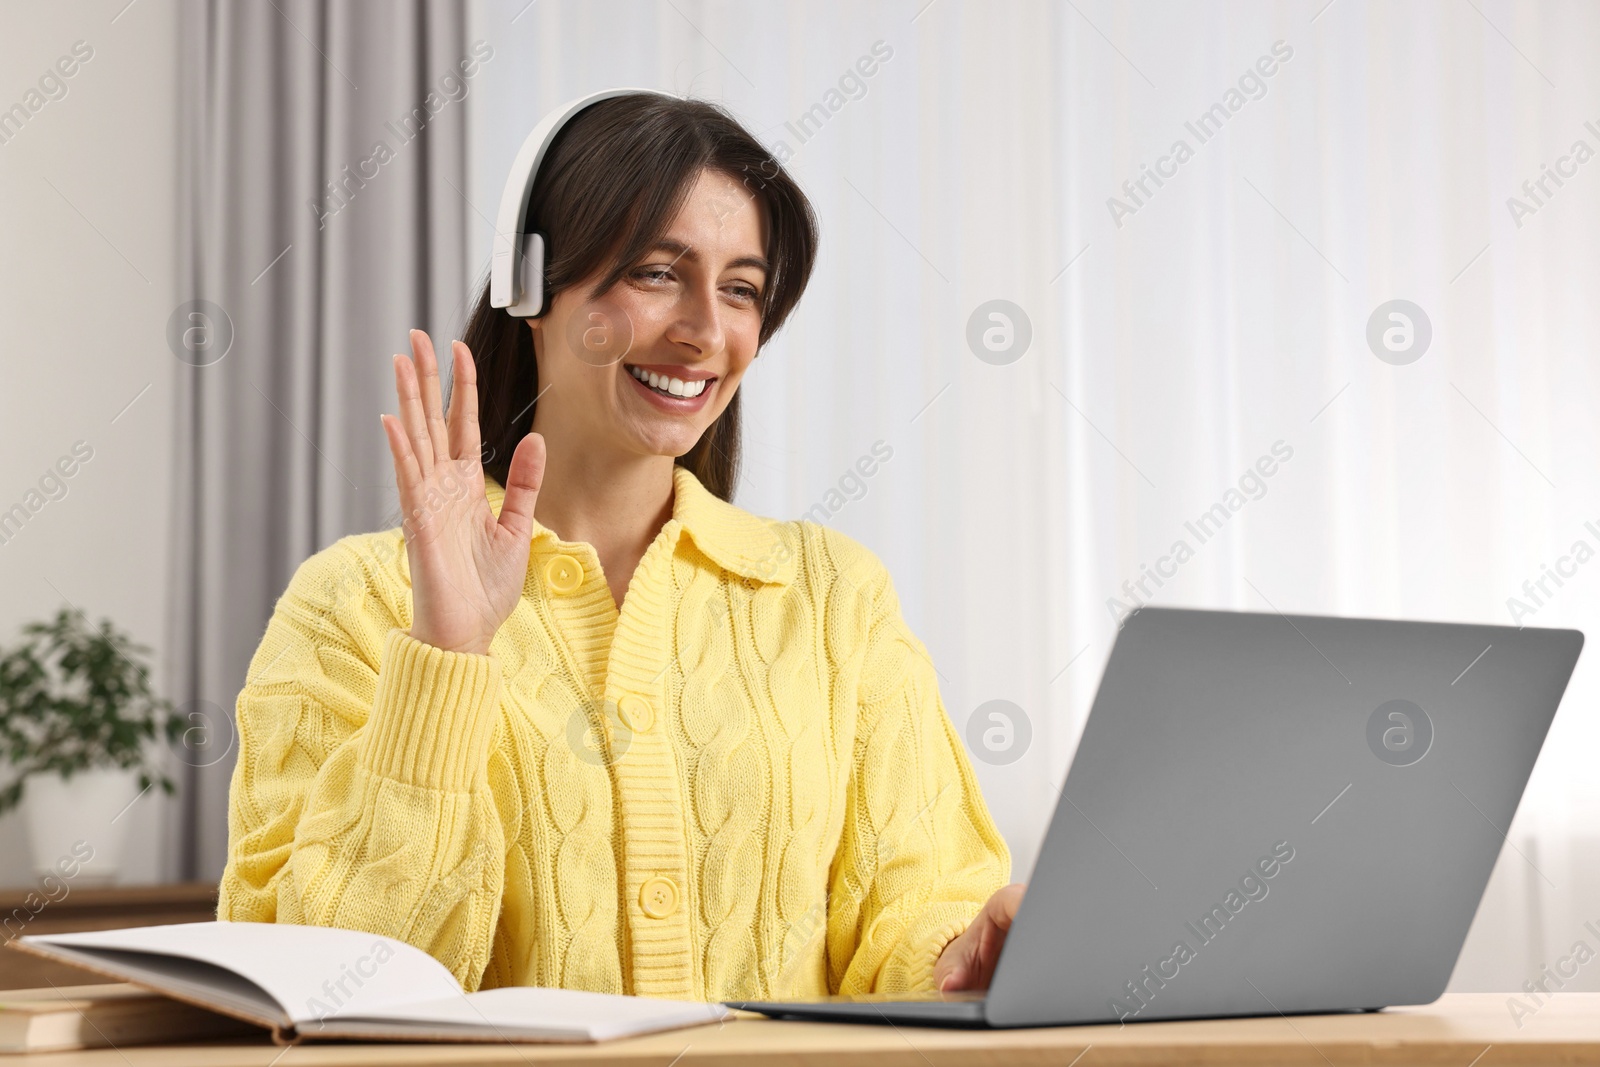 Photo of Happy woman waving hello during video chat via laptop at table indoors